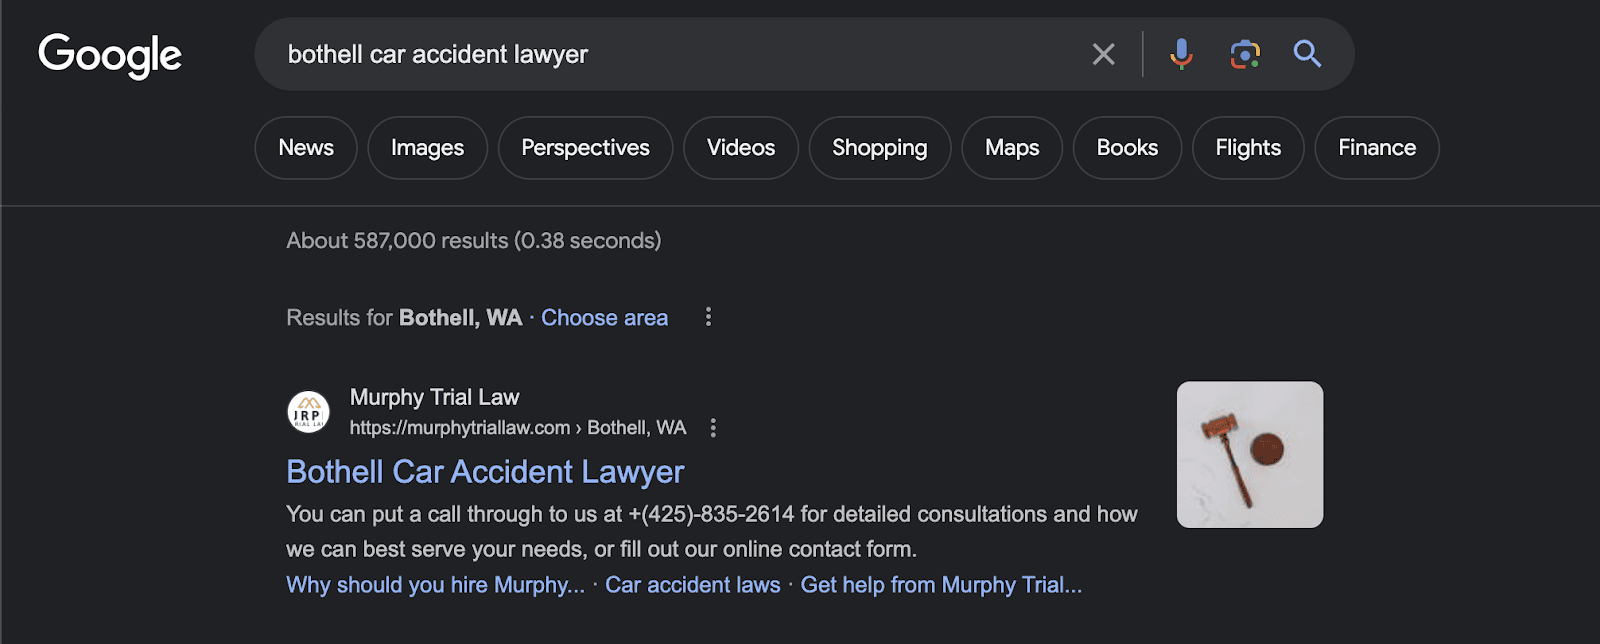 murphy trial law google result